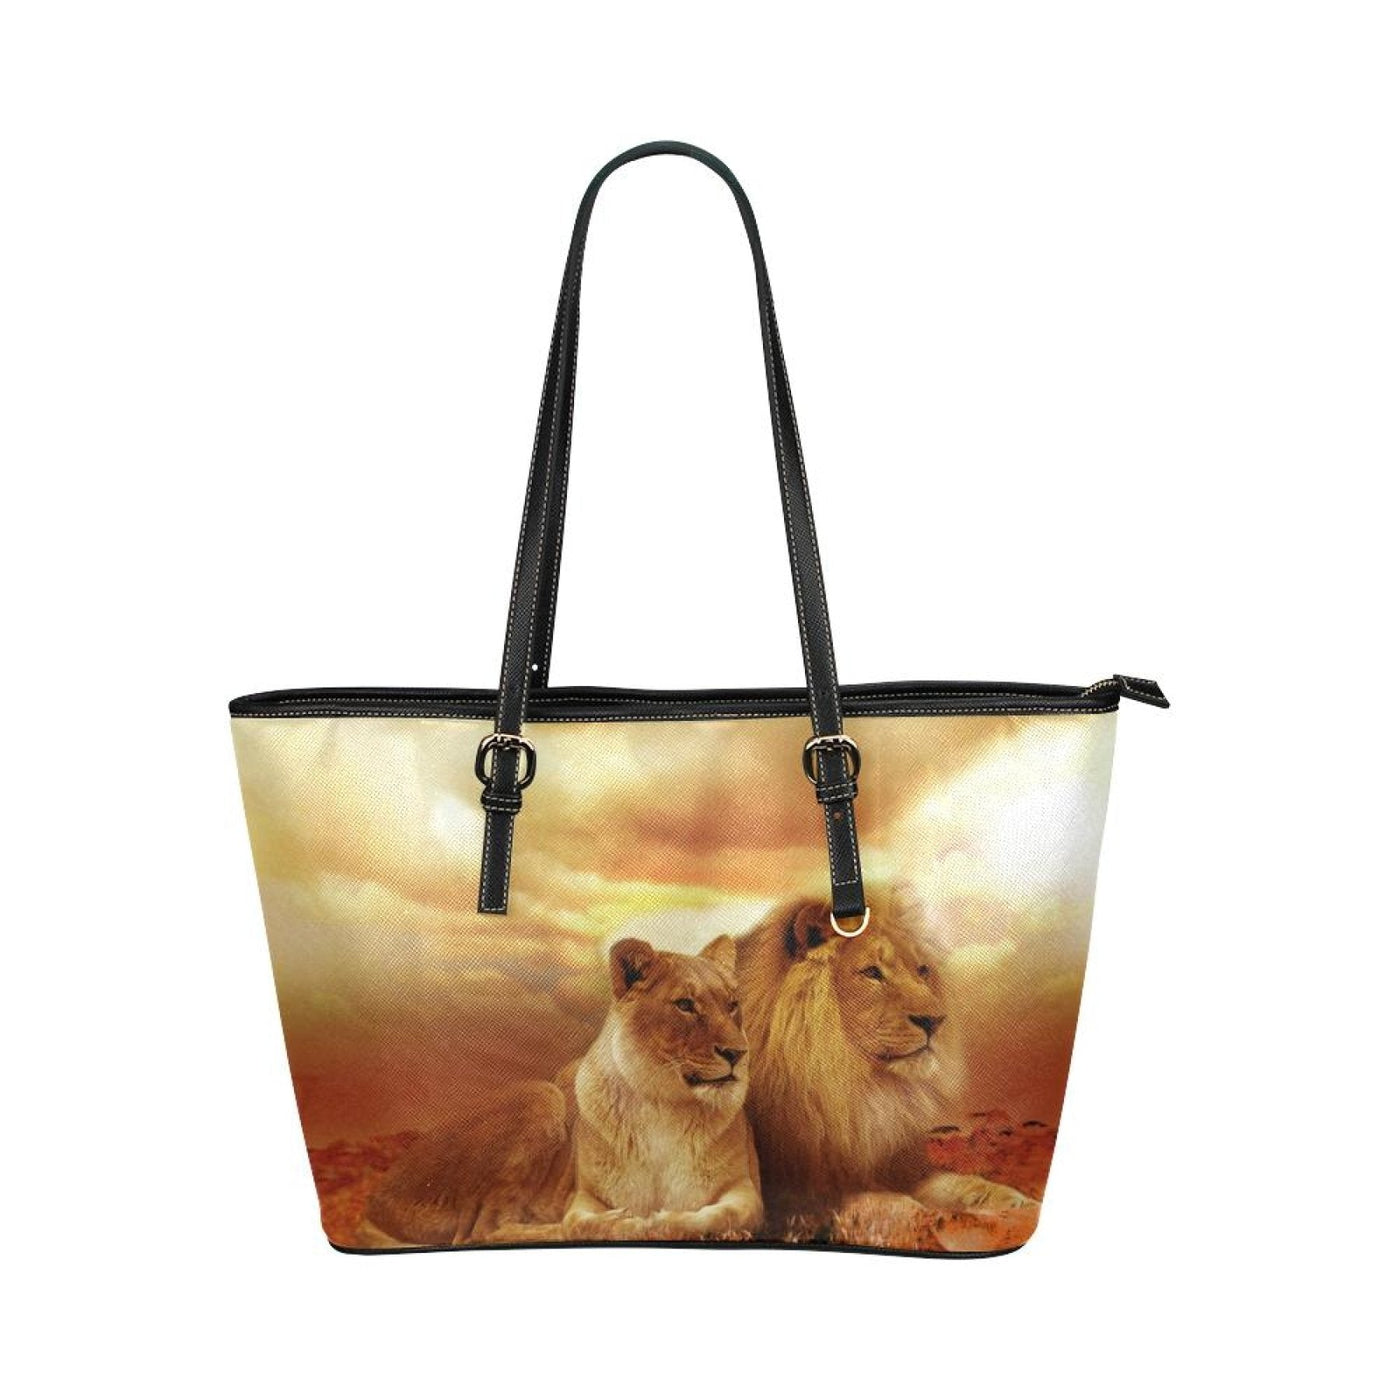 Large Leather Tote Shoulder Bag - Brown Lion And Lioness B3554930 - Bags |